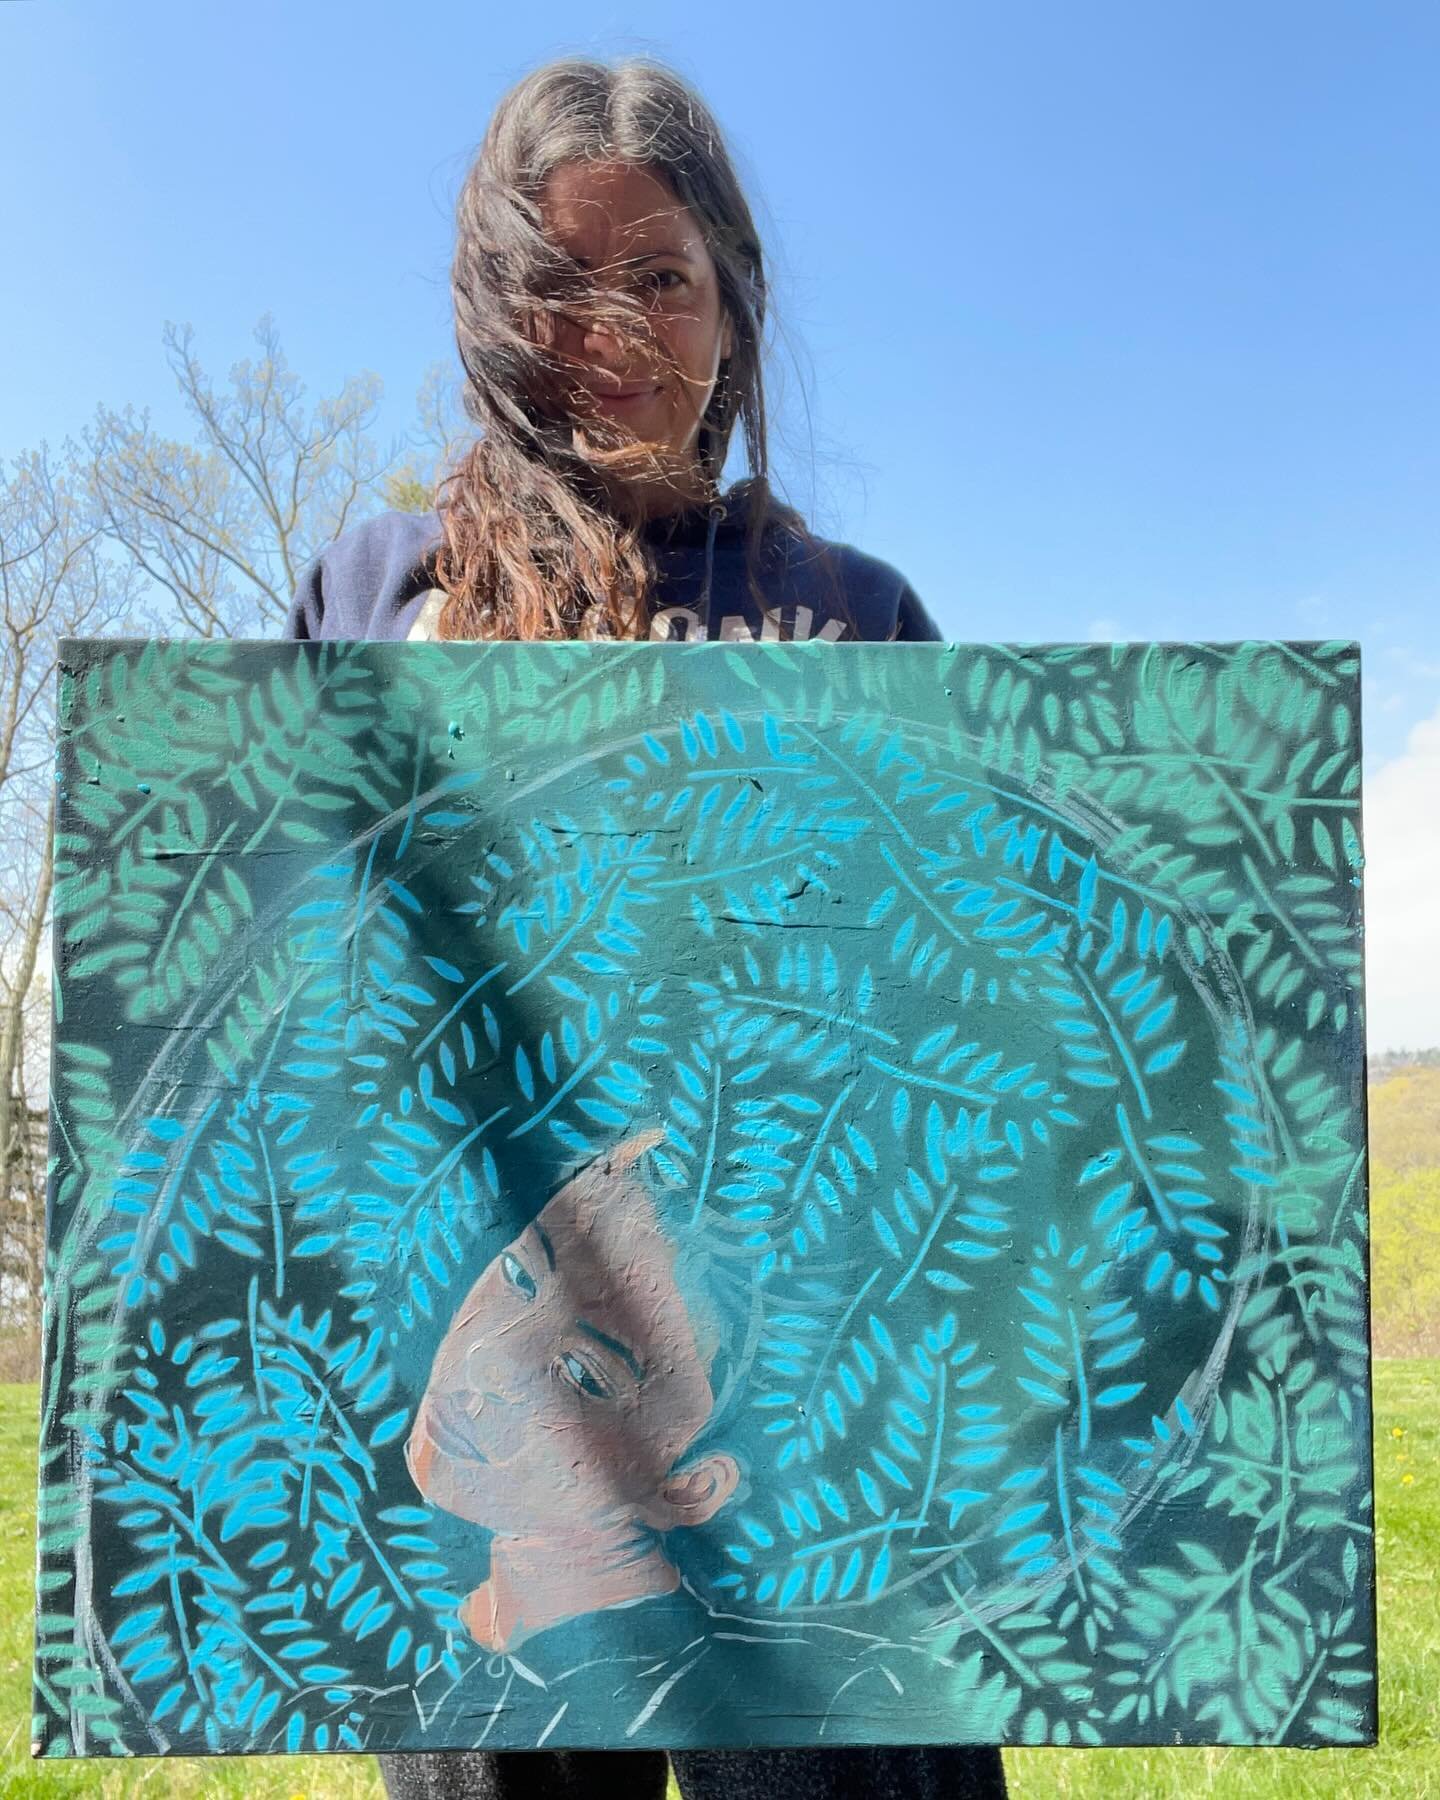 Beautiful day to get the spray painting done on this piece. Using Malachite and Argo Blue #montanacans - just the beginning. 💙💚
.
.
.
#hudsonvalleyart #hudsonvalleyartists #artistmom #portrait #portraitpainting #acryliconcanvas #womenartist #womanp